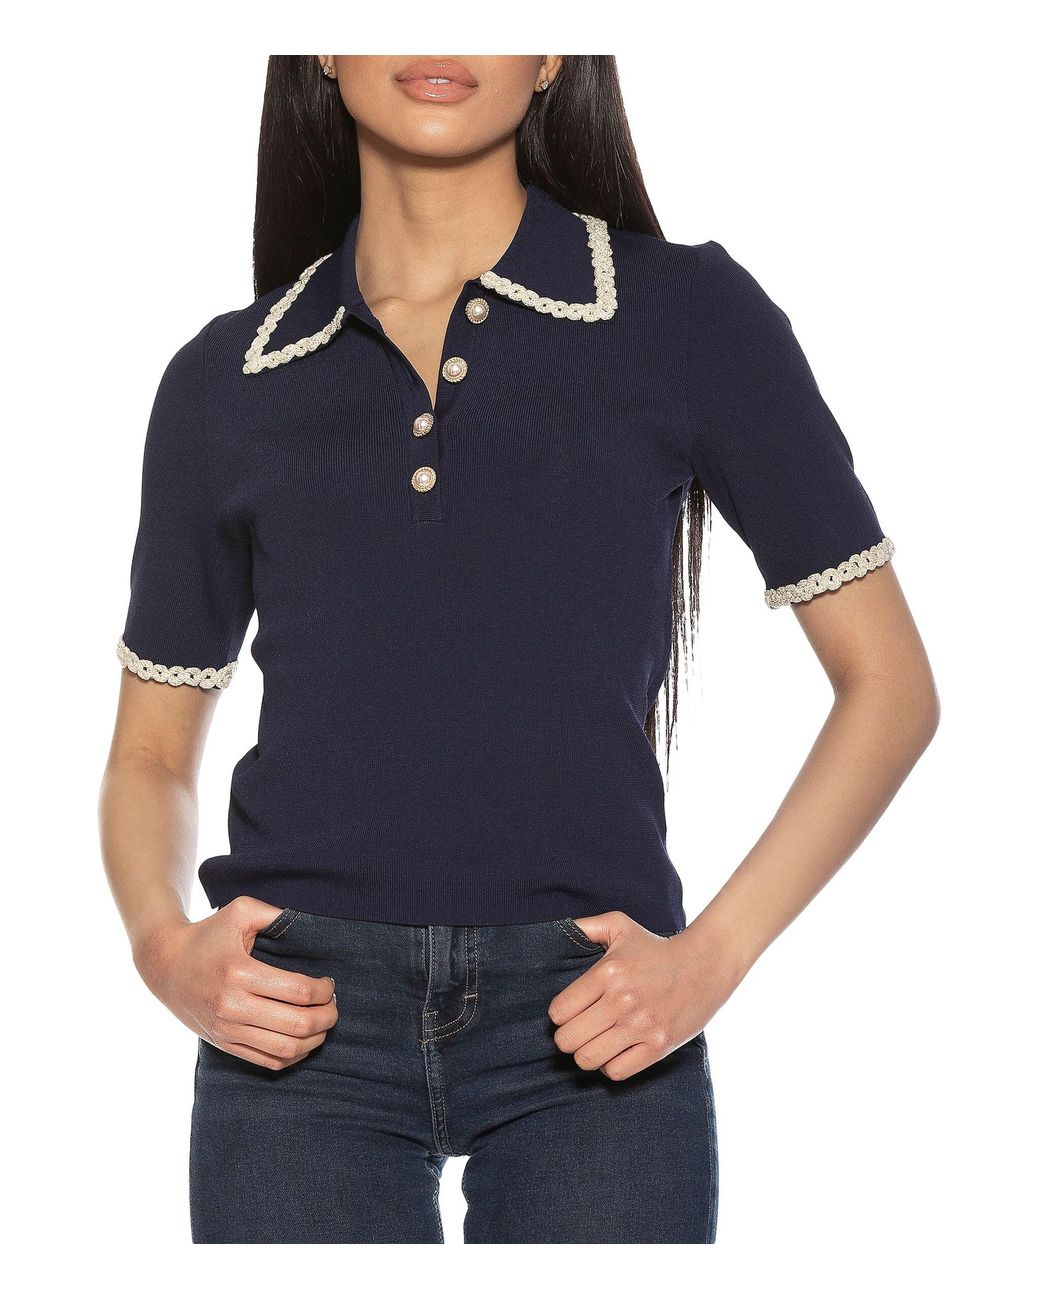 Alexia Admor Synthetic Brianna Collared Top in Navy (Blue) | Lyst